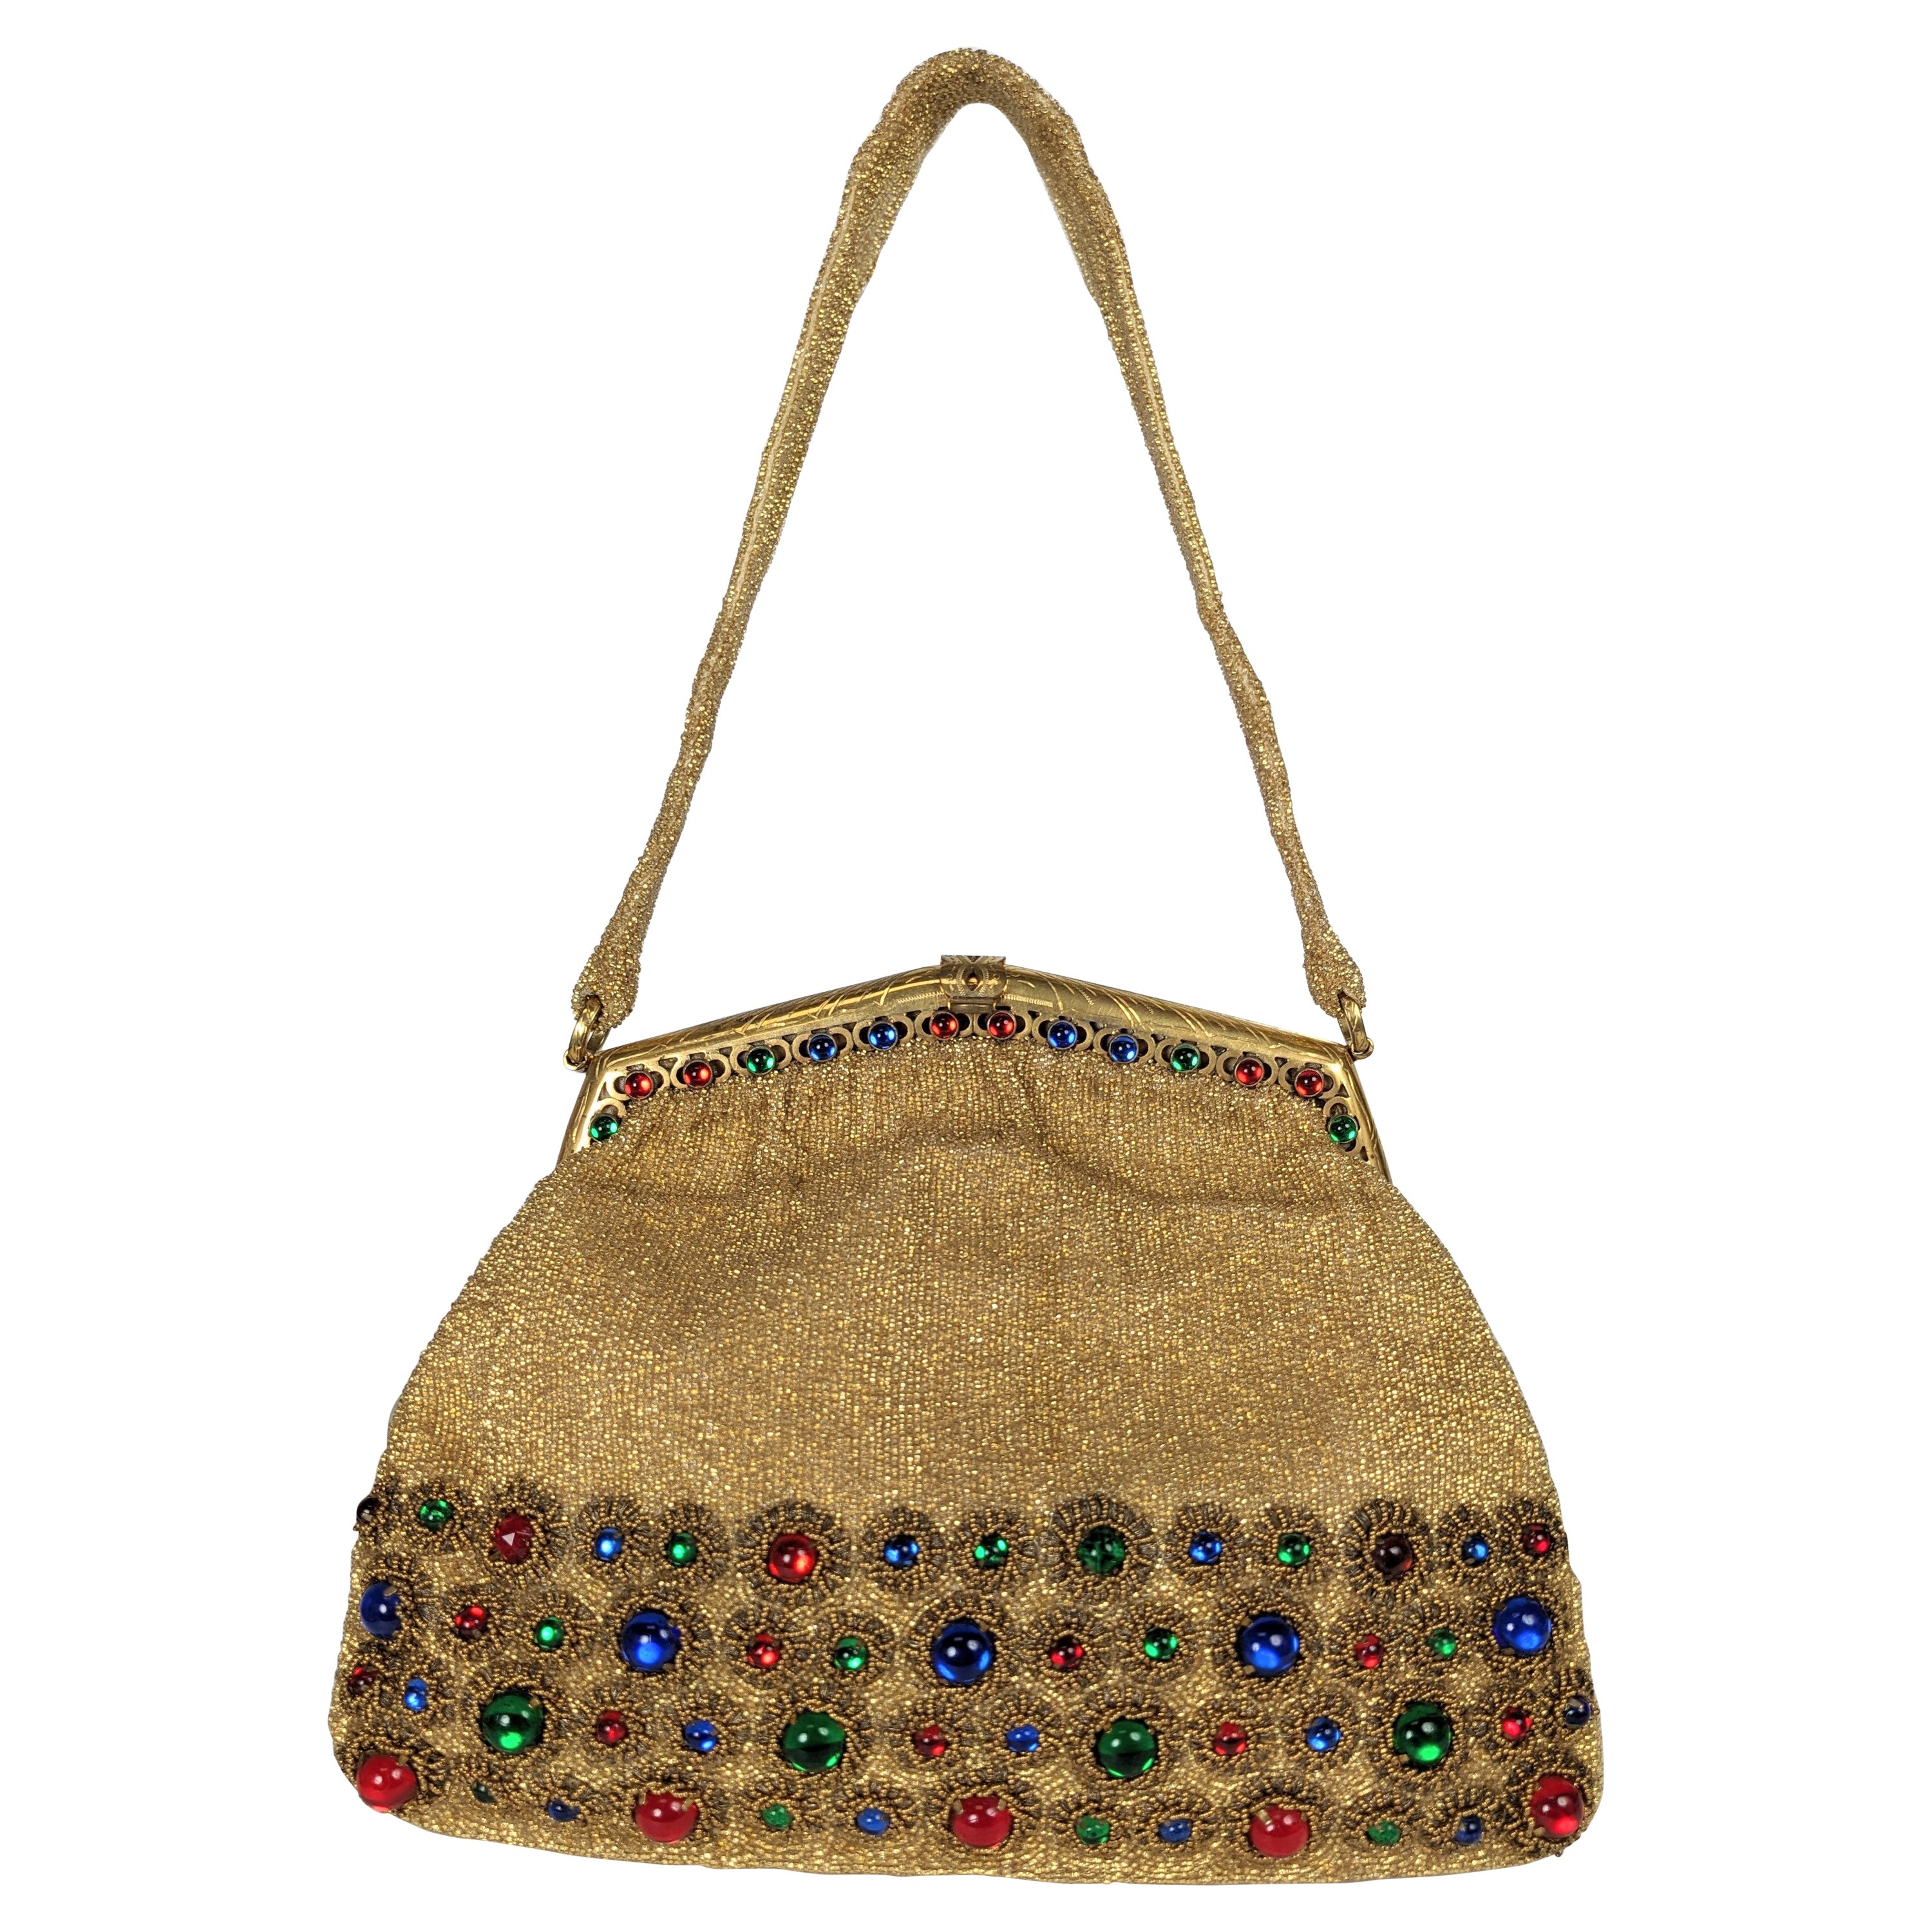 Elaborate Beaded French Evening Bag, Saks Fifth Ave. For Sale